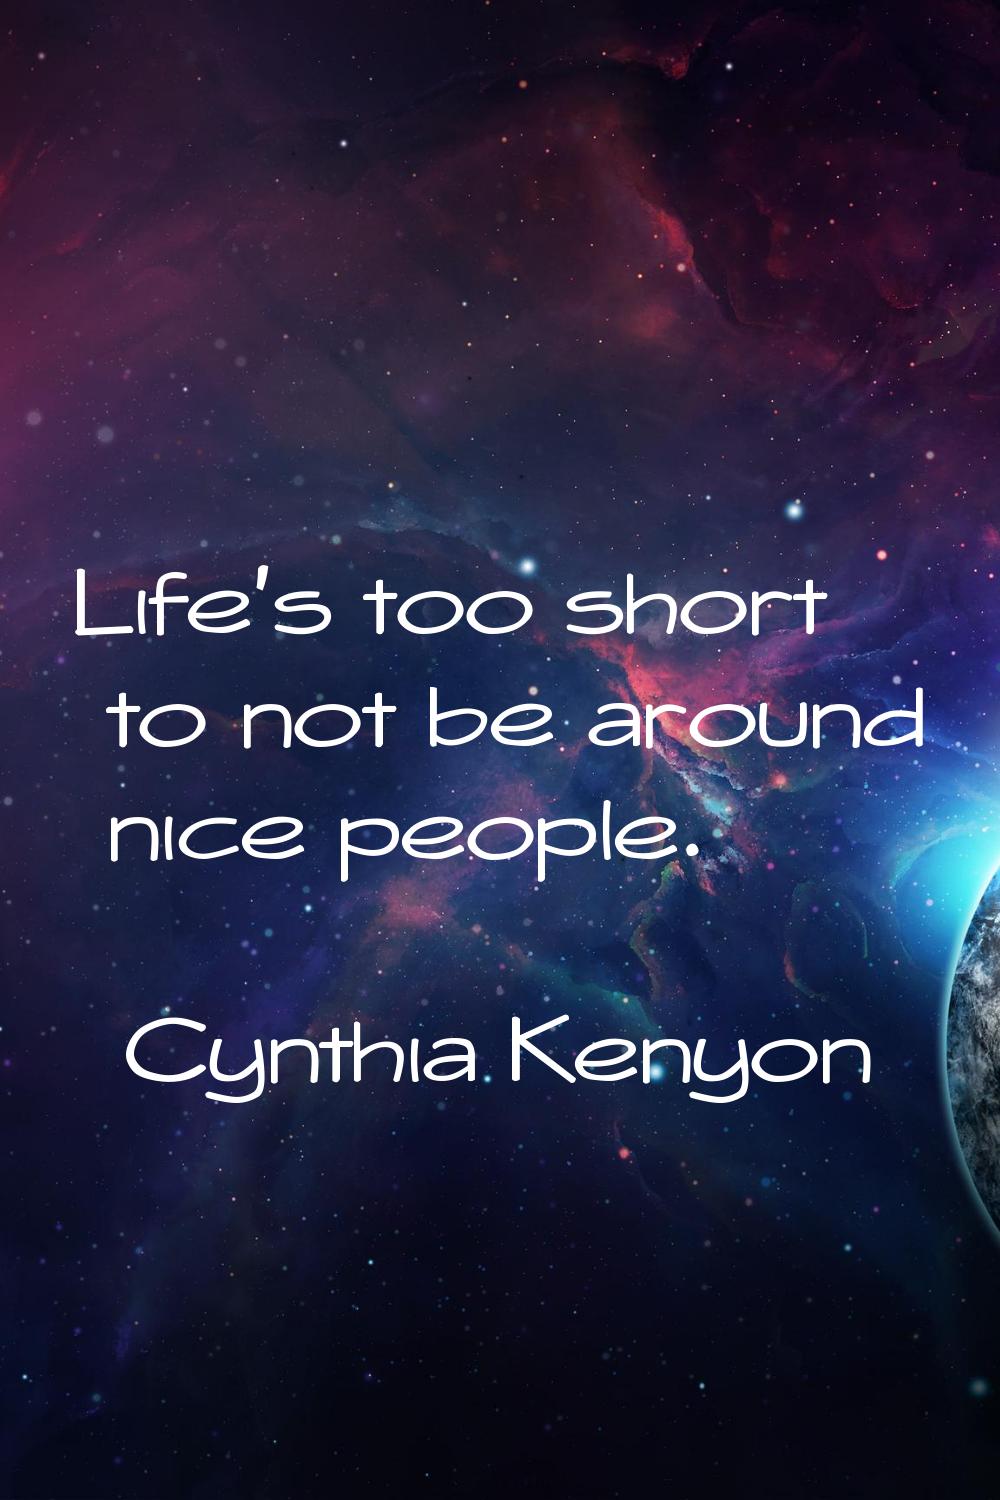 Life's too short to not be around nice people.